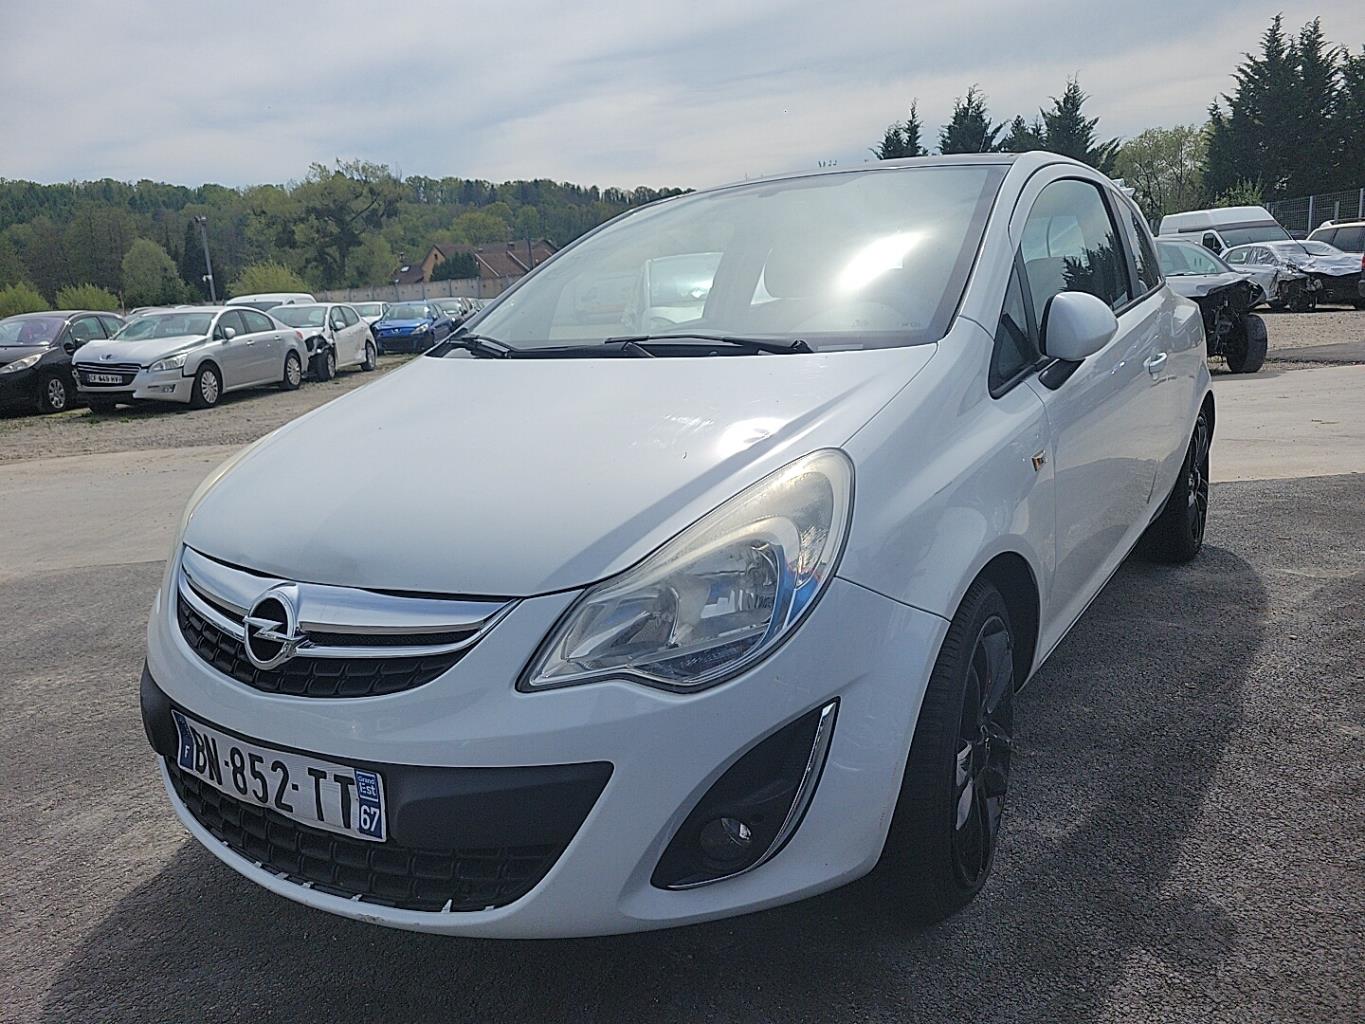 Cremaillere assistee pour OPEL CORSA (D) PHASE 2